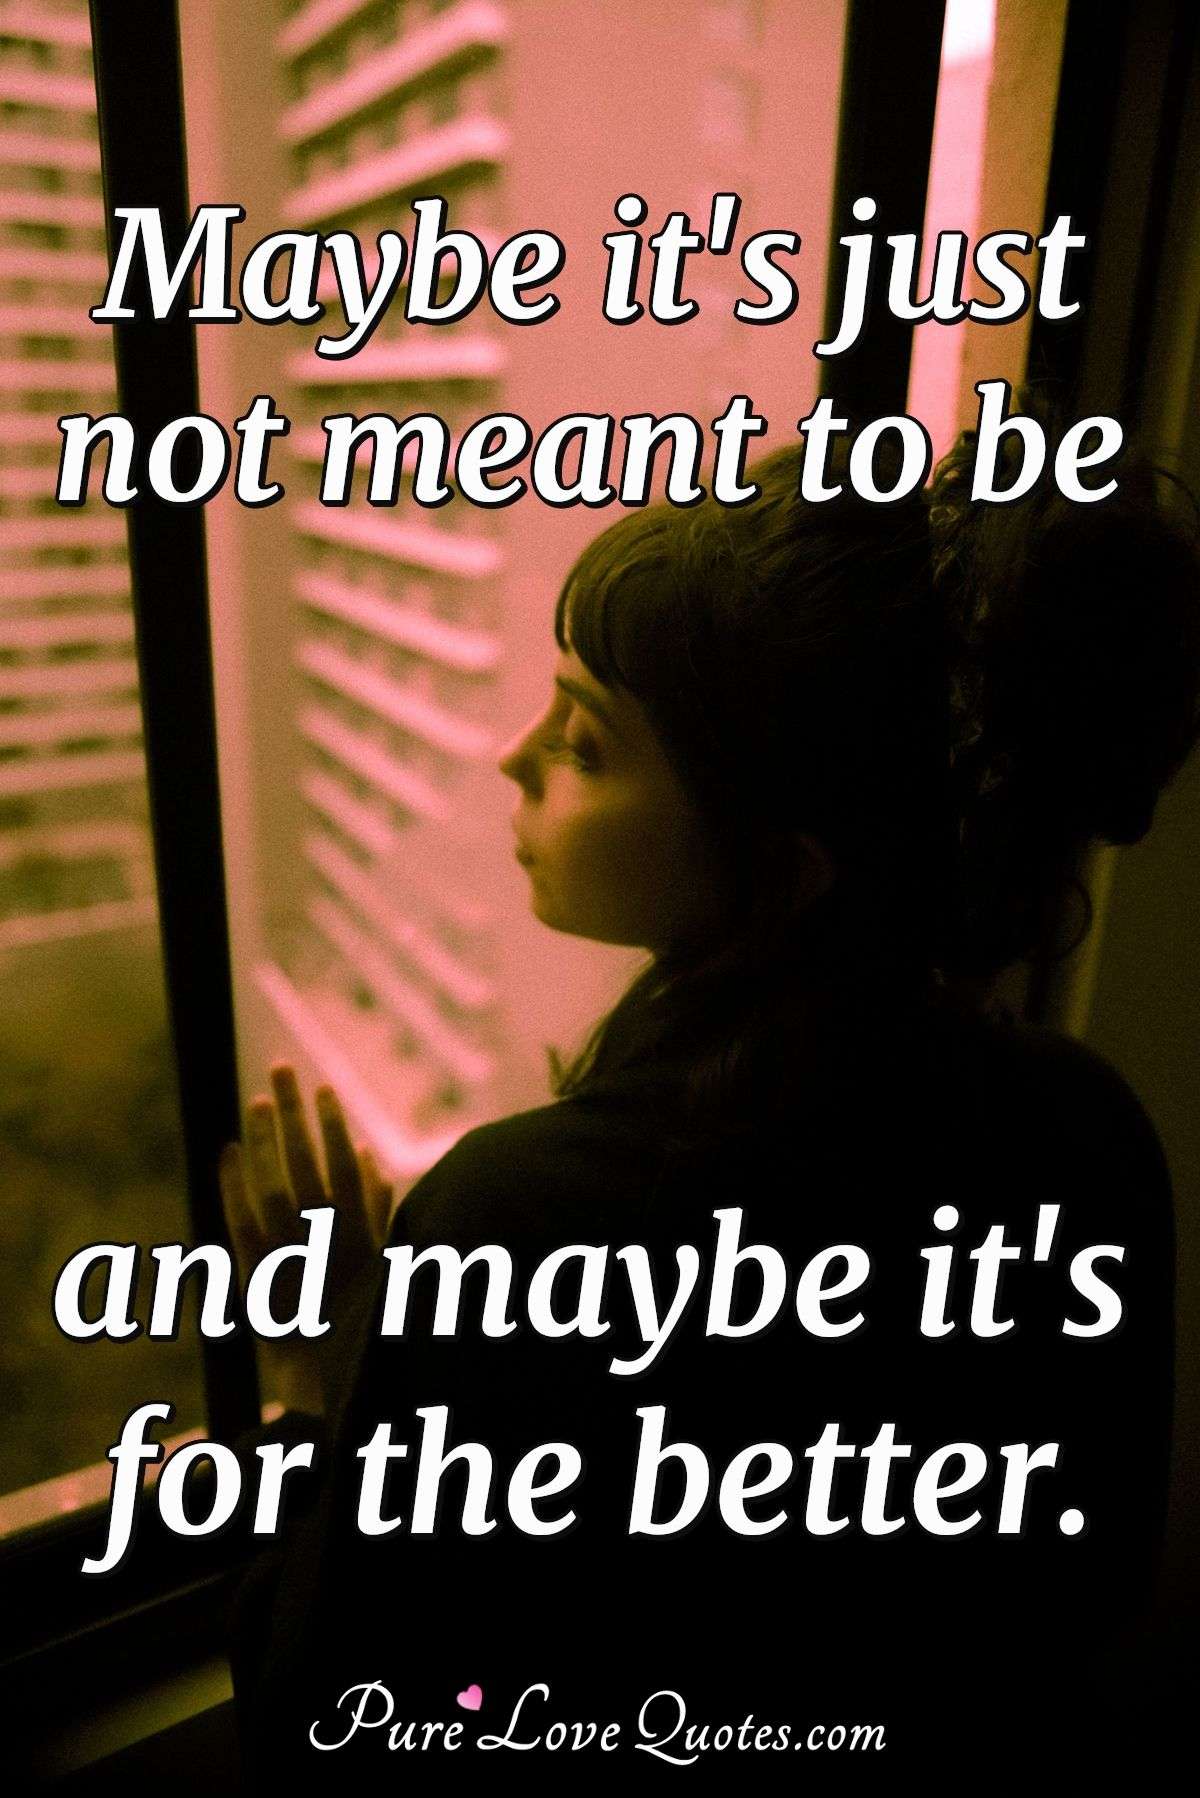 Maybe it's just not meant to be and maybe it's for the better. - Anonymous